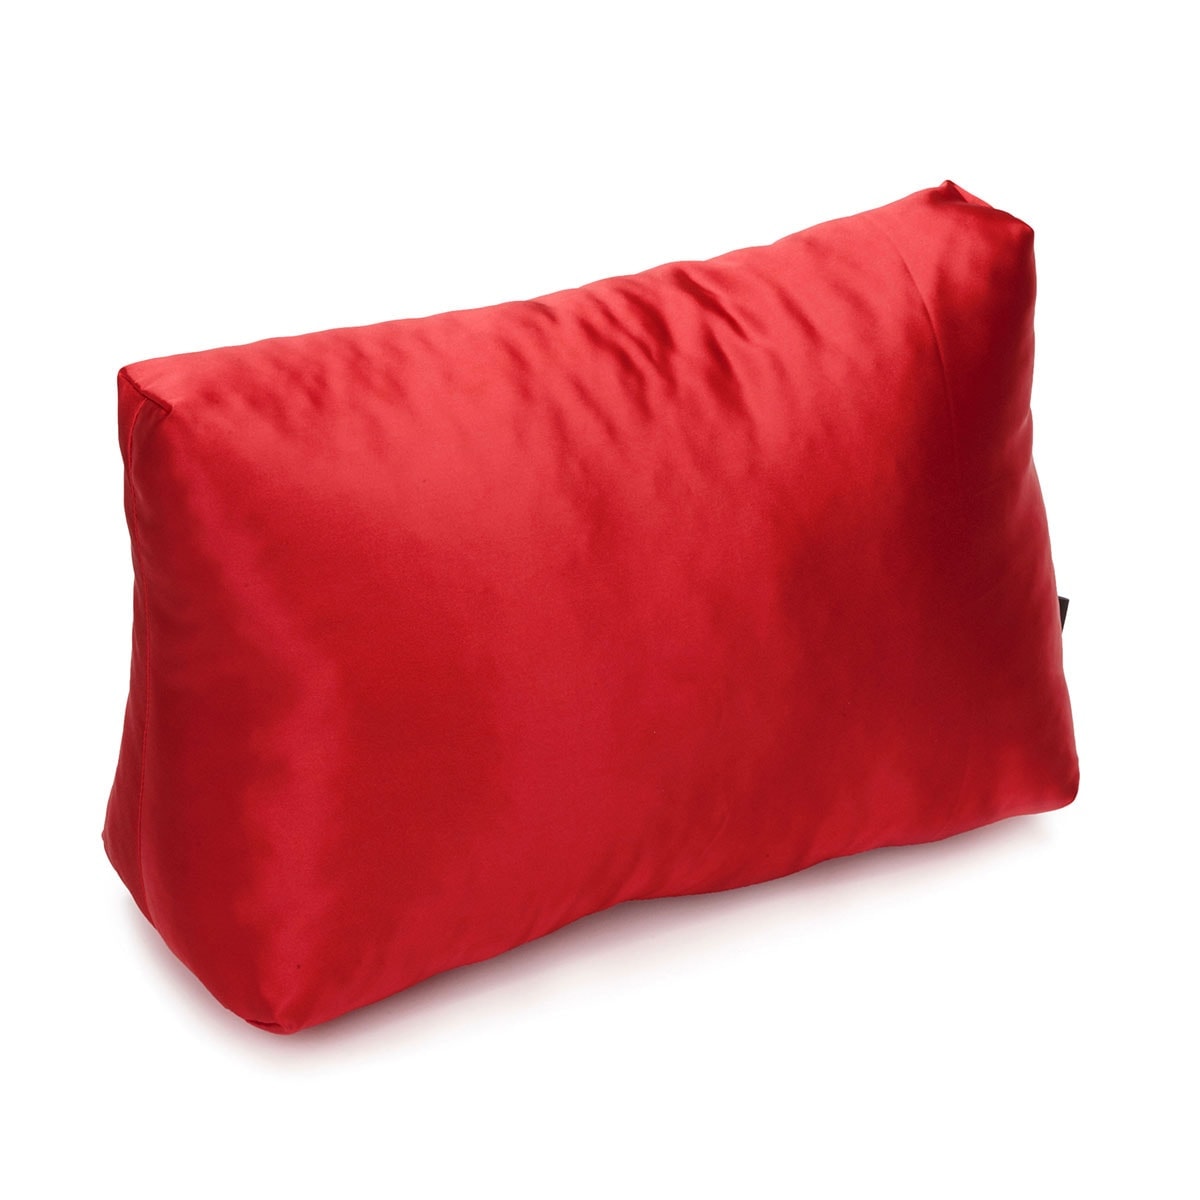  Satin Pillow Luxury Bag Shaper Compatible for the Designer Bag  Alma BB, PM, and MM : Handmade Products